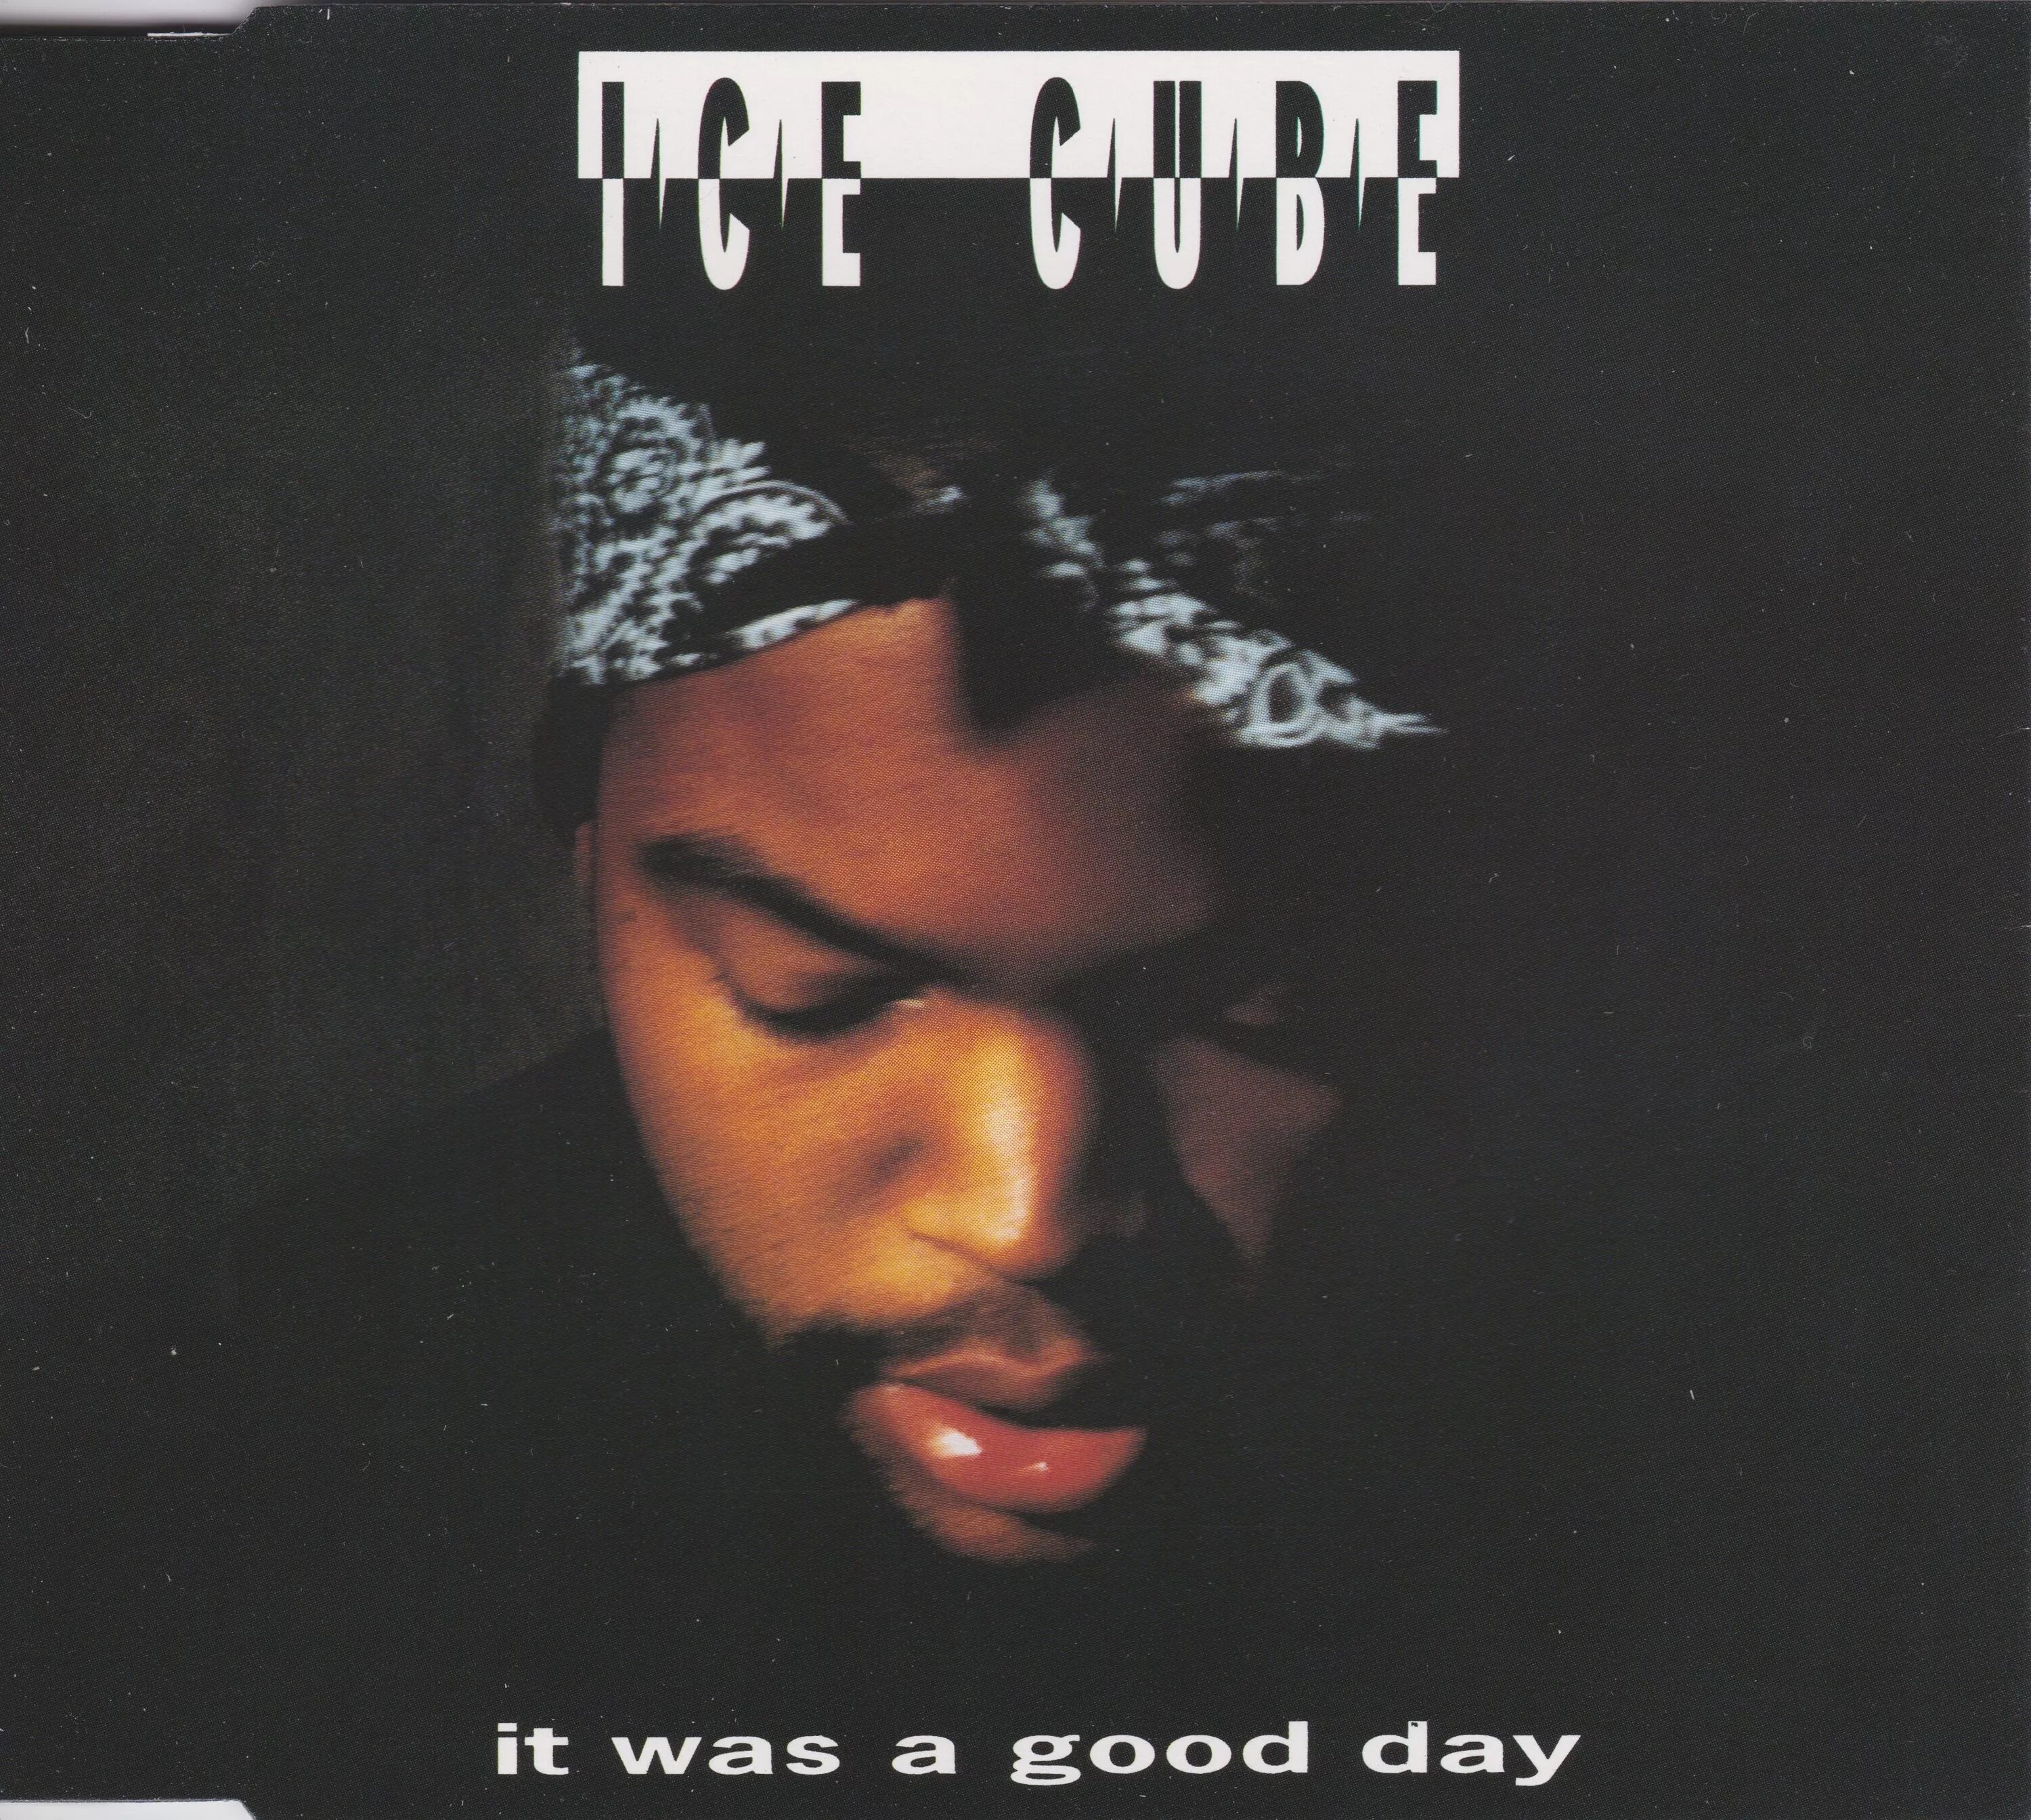 Ice cube you know. Гуд Дэй айс Кьюб. Ice Cube is was a good Day. Ice Cube обложки альбомов. Ice Cube good cop Bad cop.